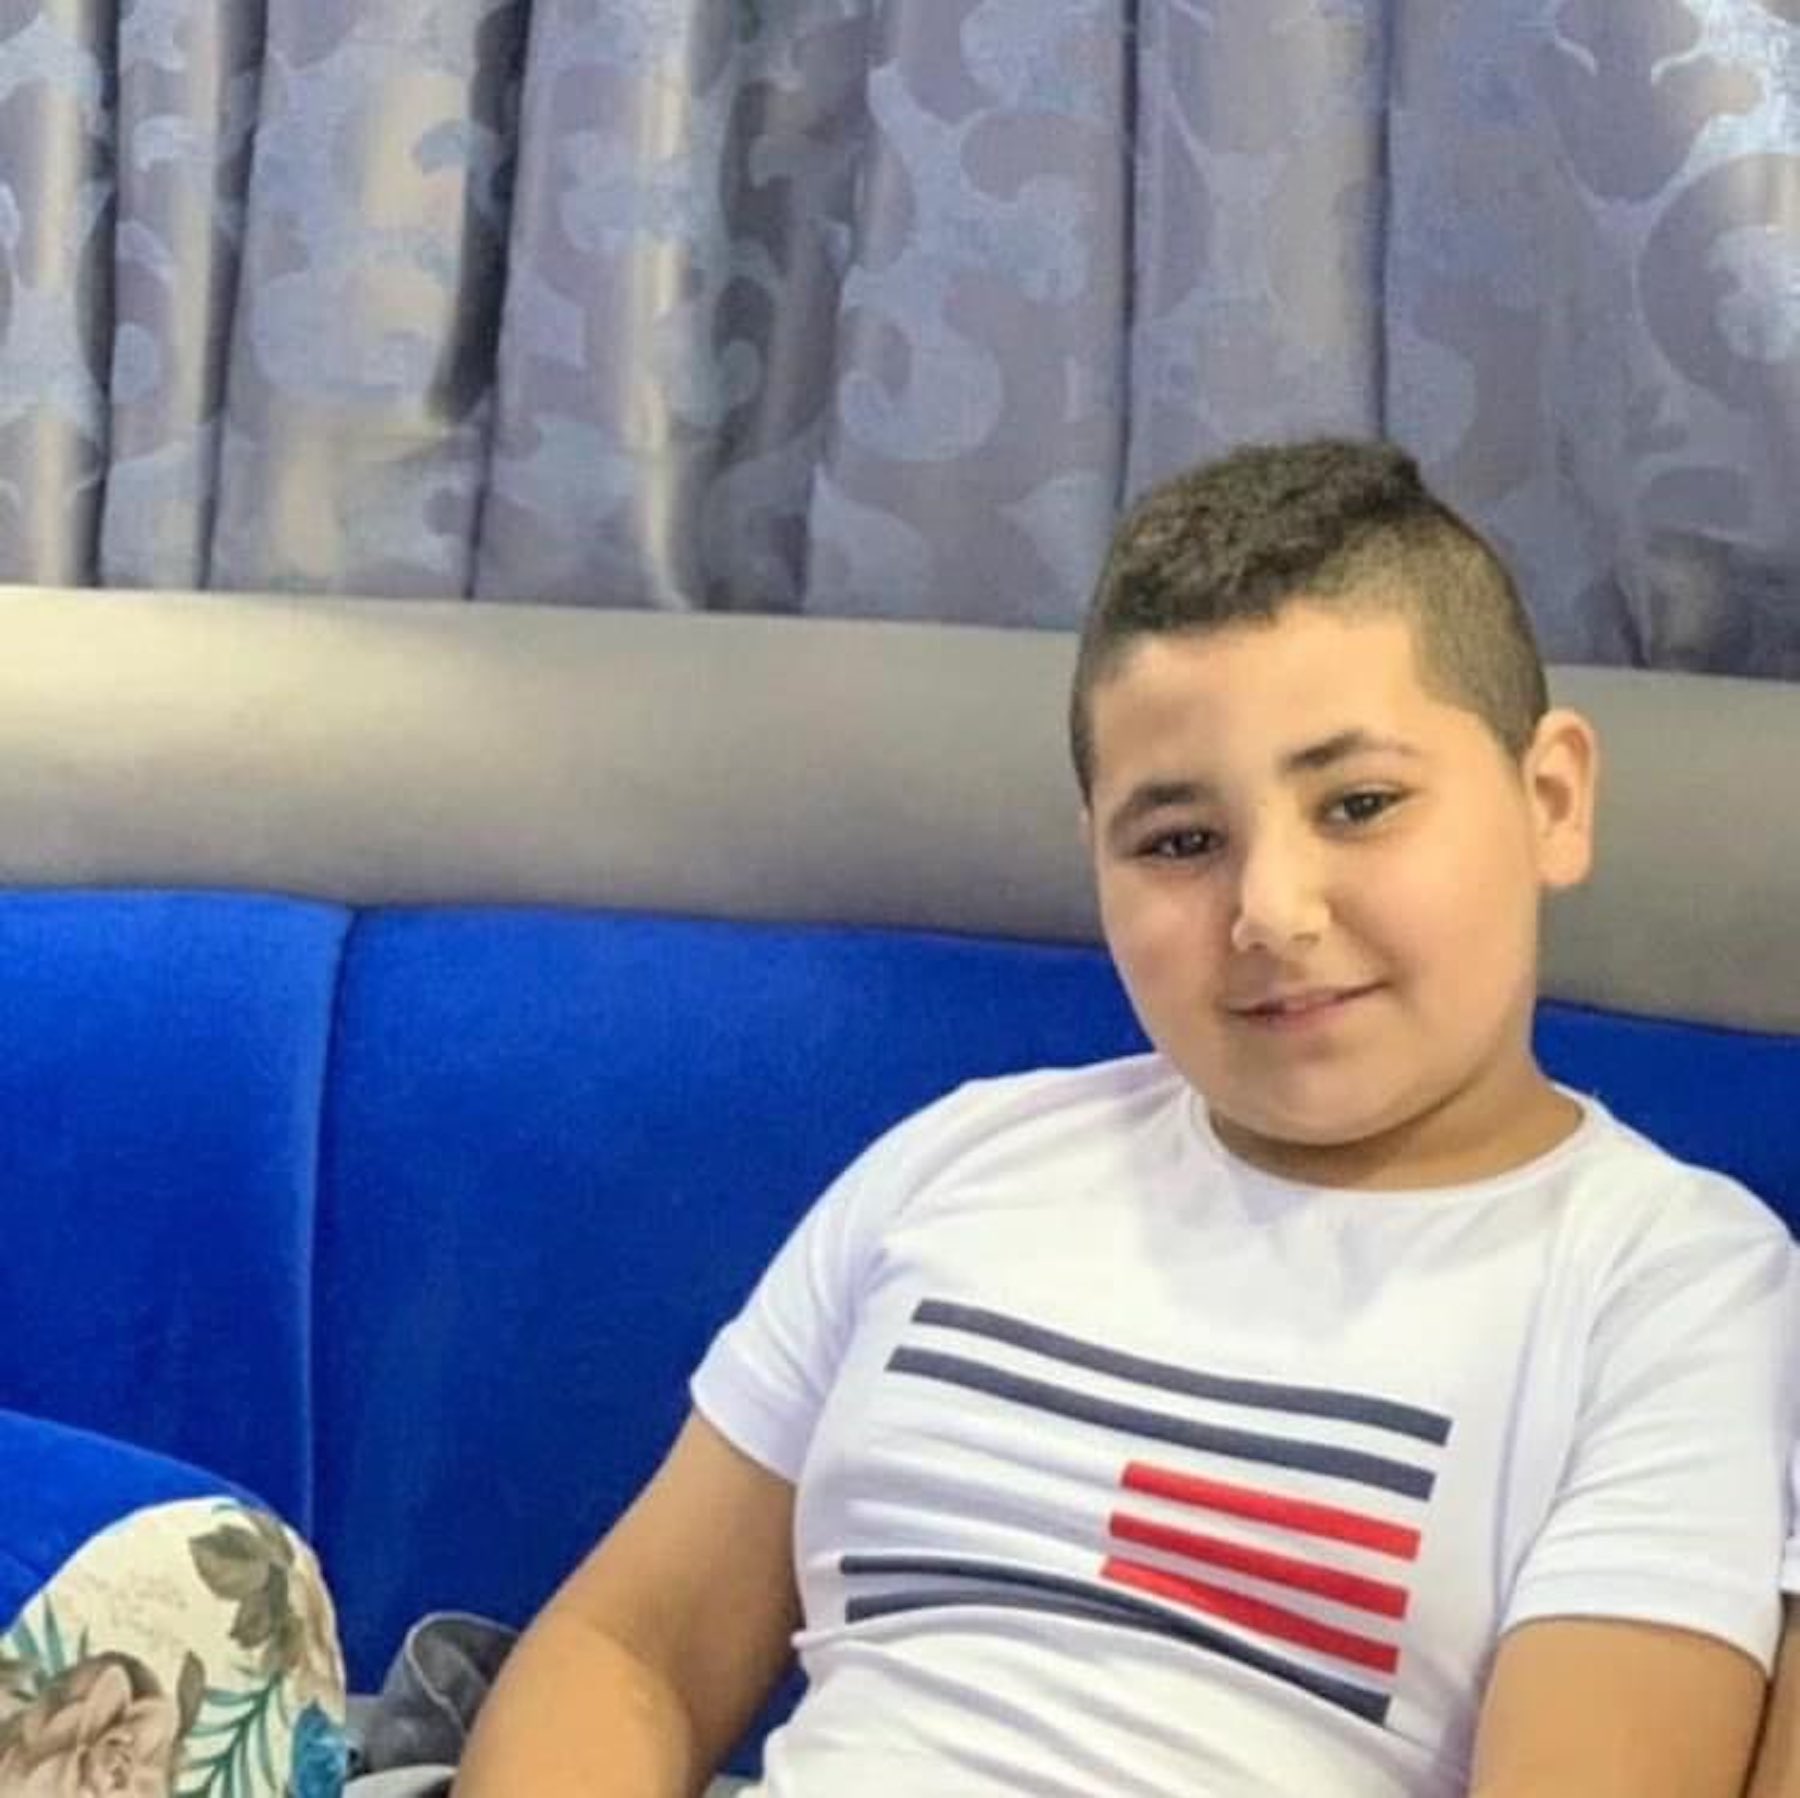 Israeli Snipers Shot And Killed This 13-Year-Old Boy While He Was Playing With Fireworks To Mark Ramadan